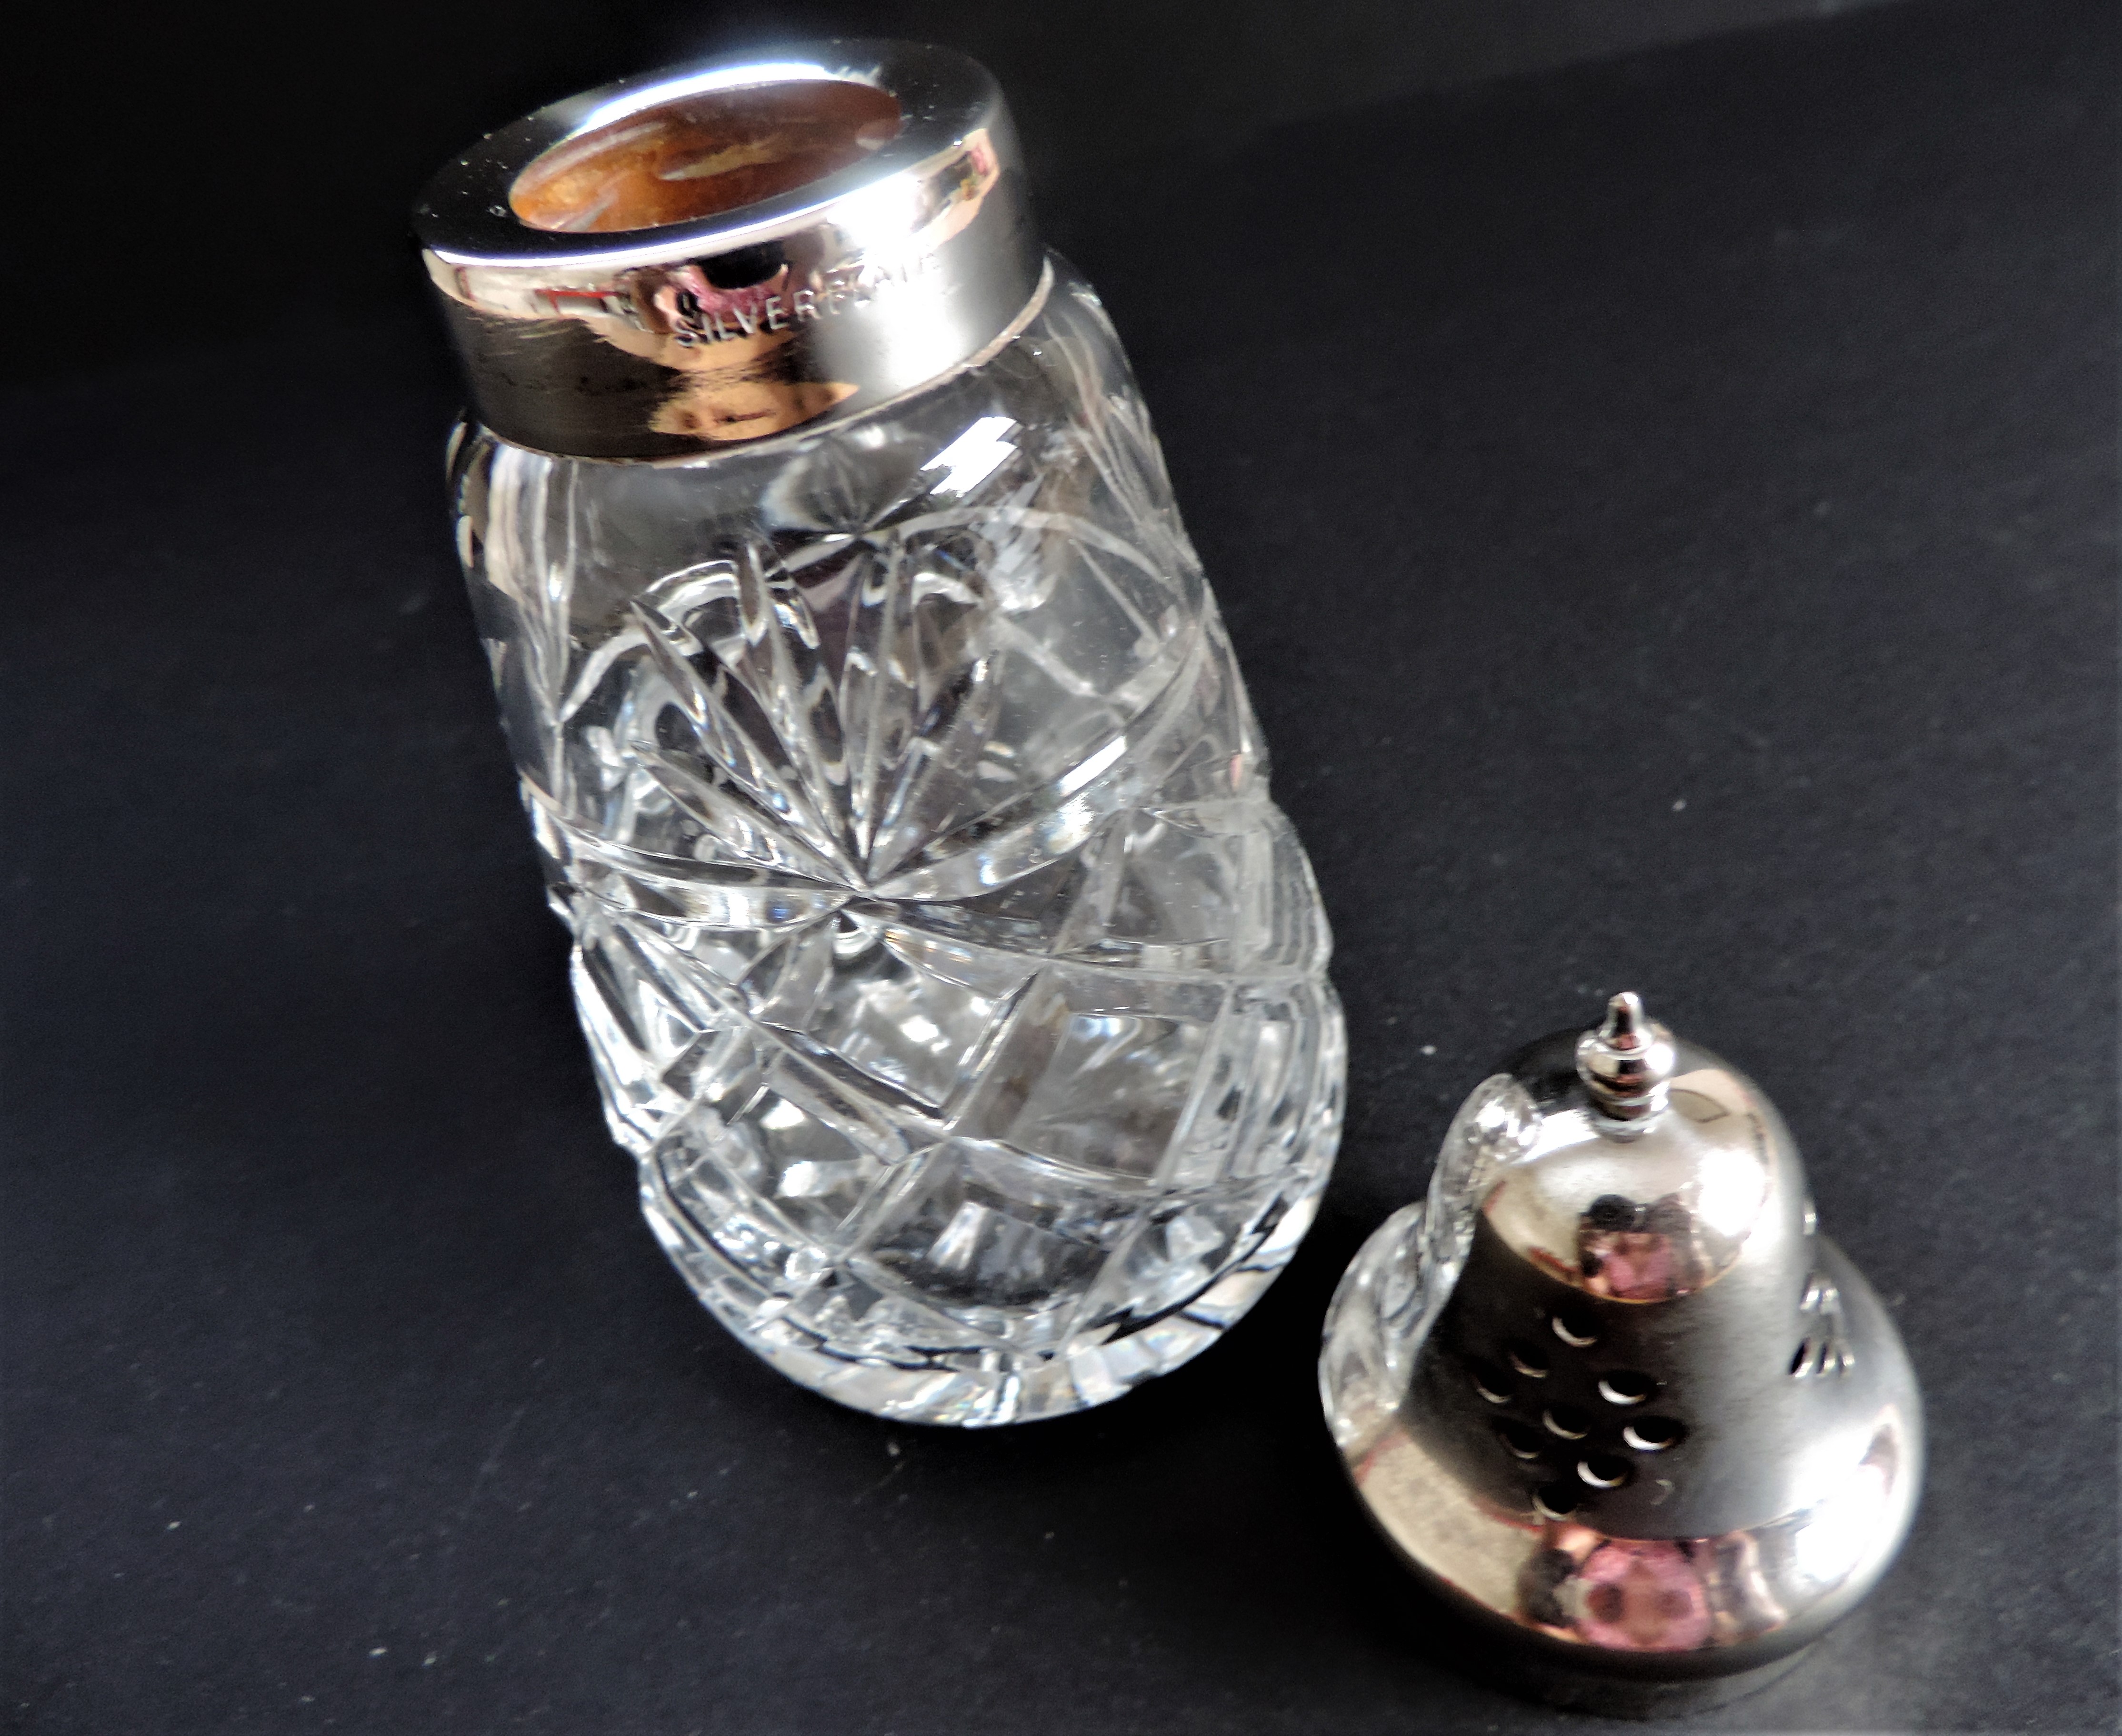 Vintage Silver Plate and Crystal Sugar Sifter/Shaker - Image 4 of 4